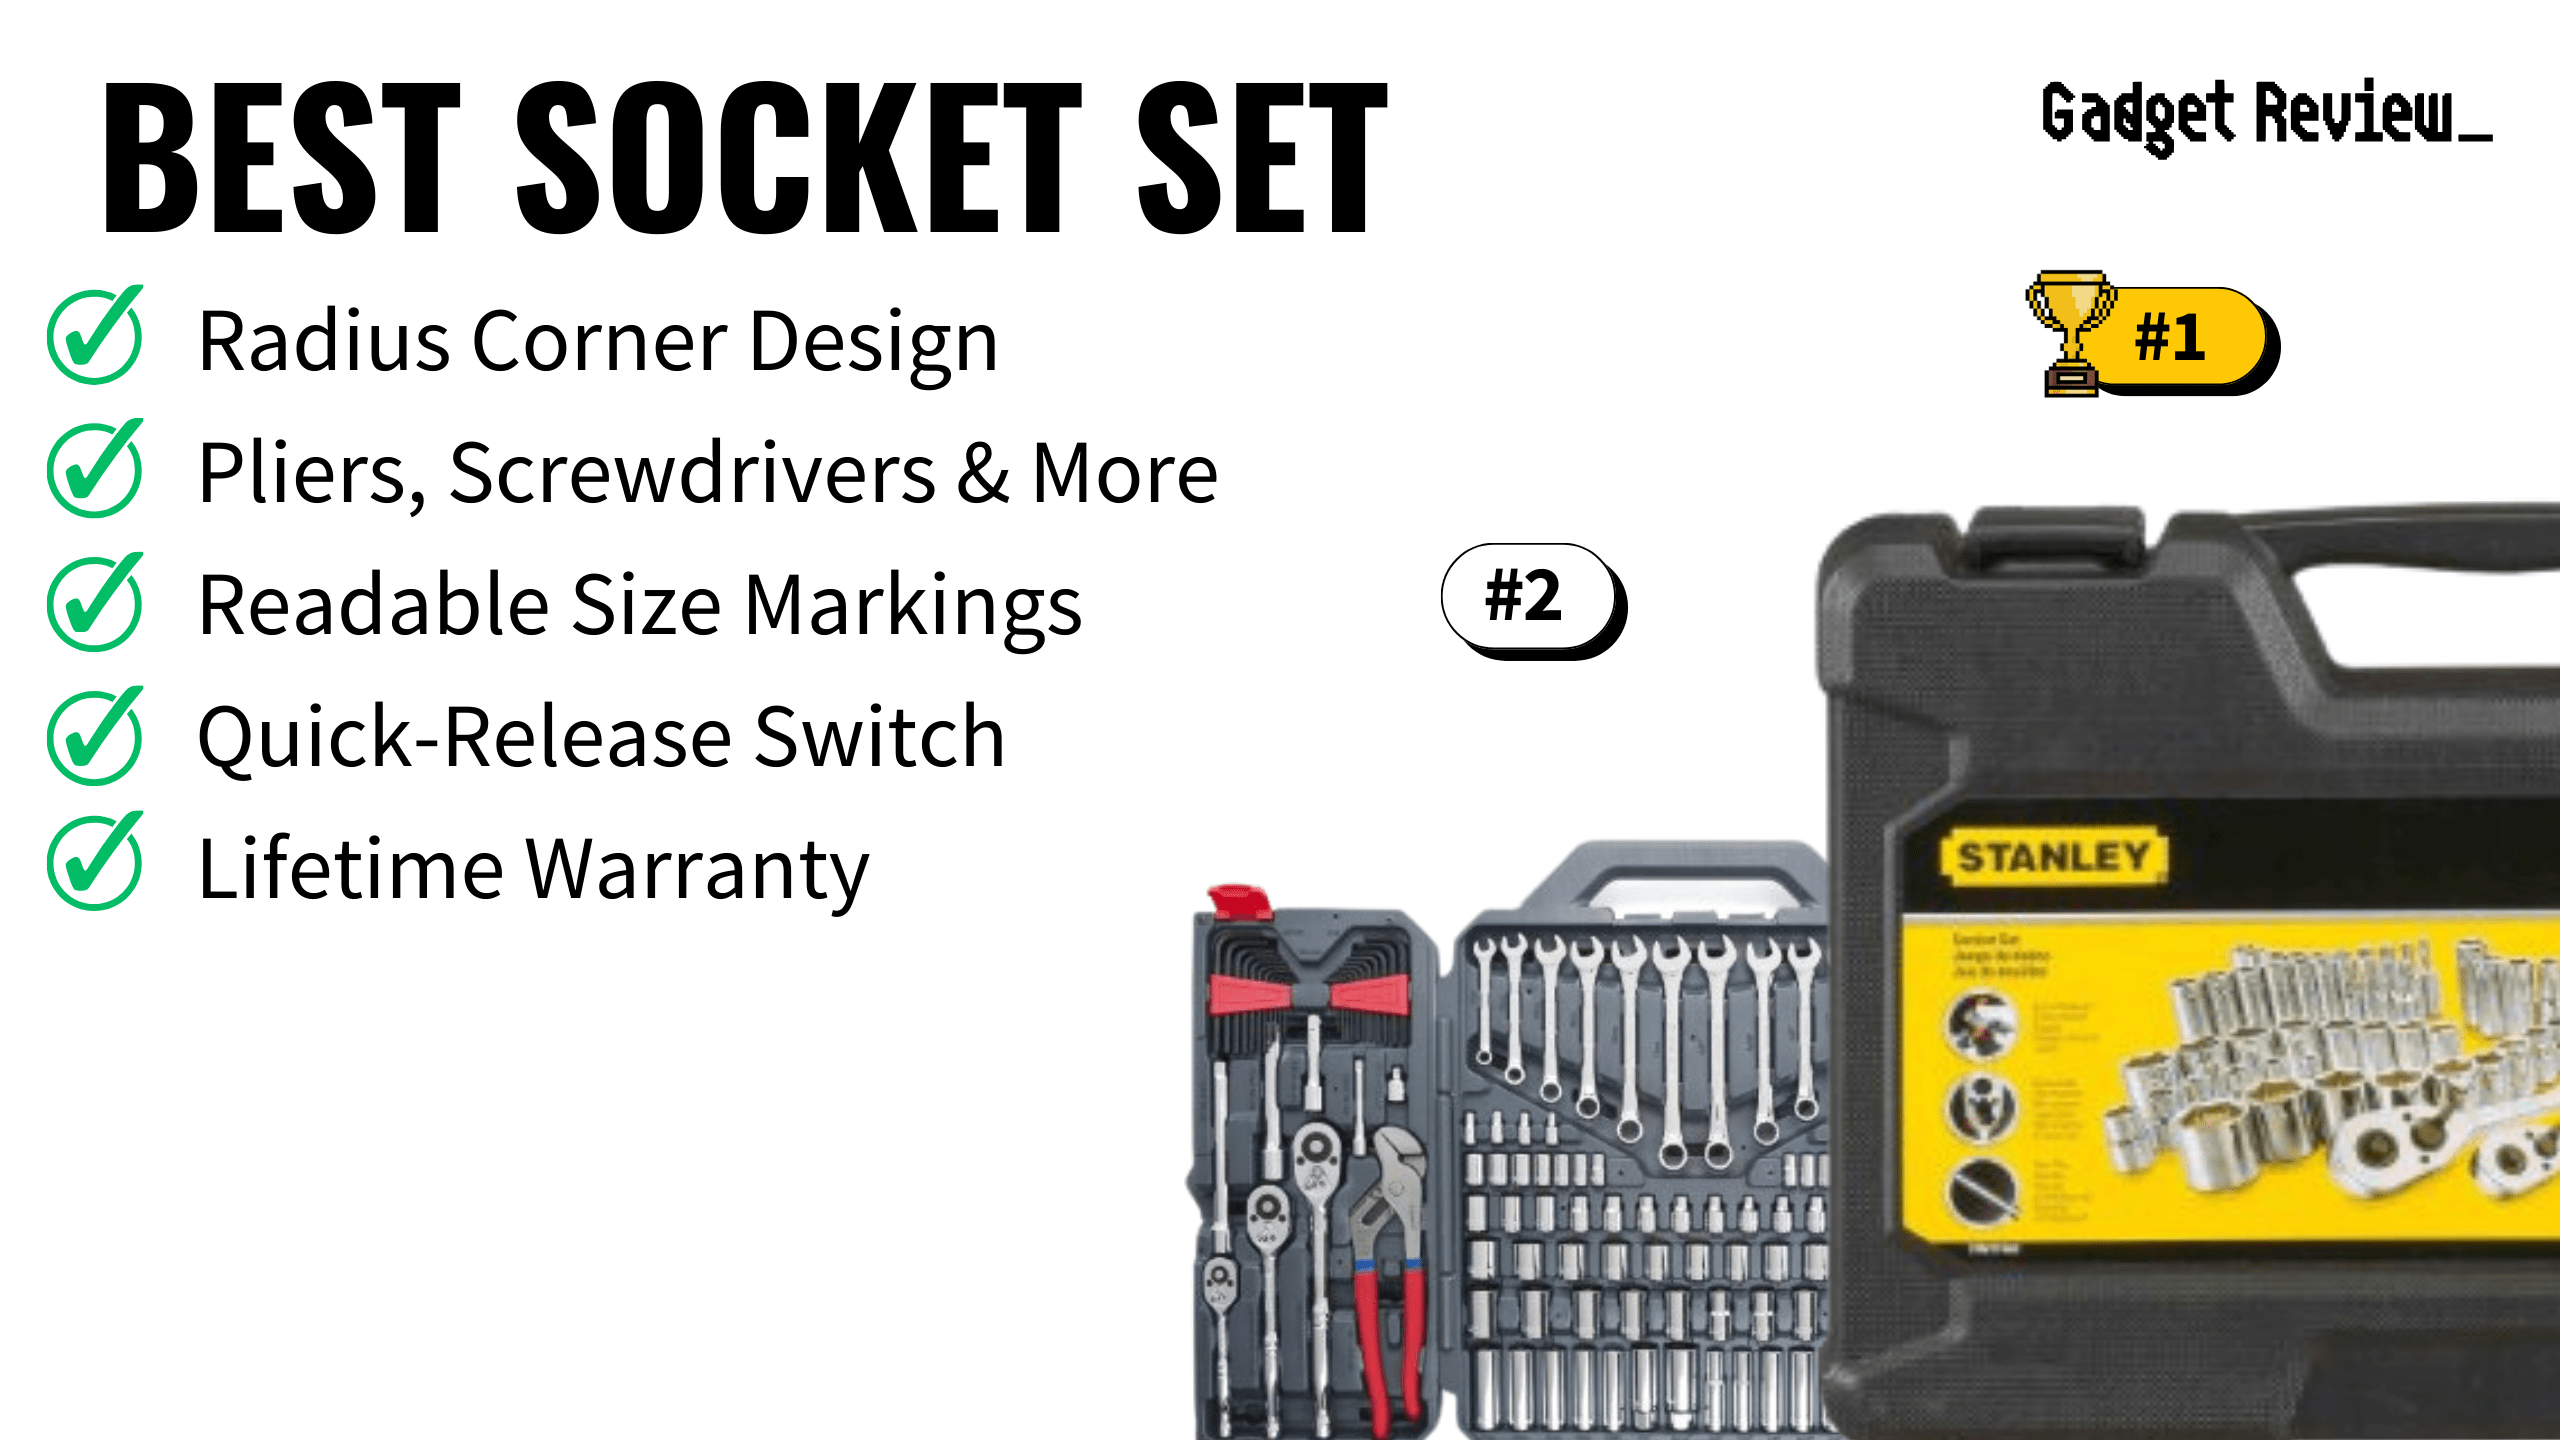 best socket set featured image that shows the top three best tool models